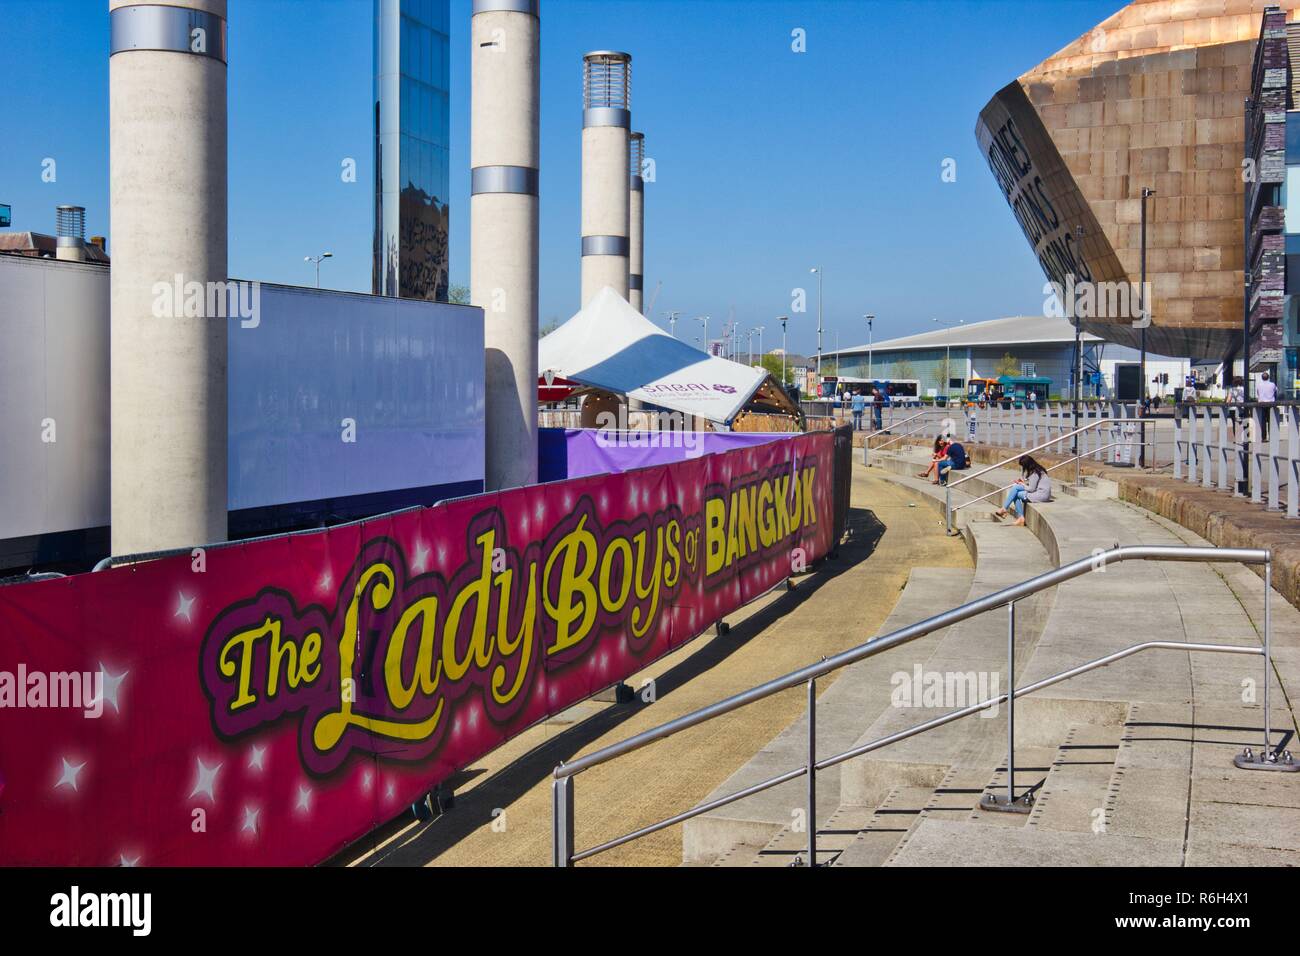 Banner for the The Lady Boys of Bangkok shows at Wales Millennium Centre, Cardiff Bay, Cardiff, Wales, United Kingdom Stock Photo